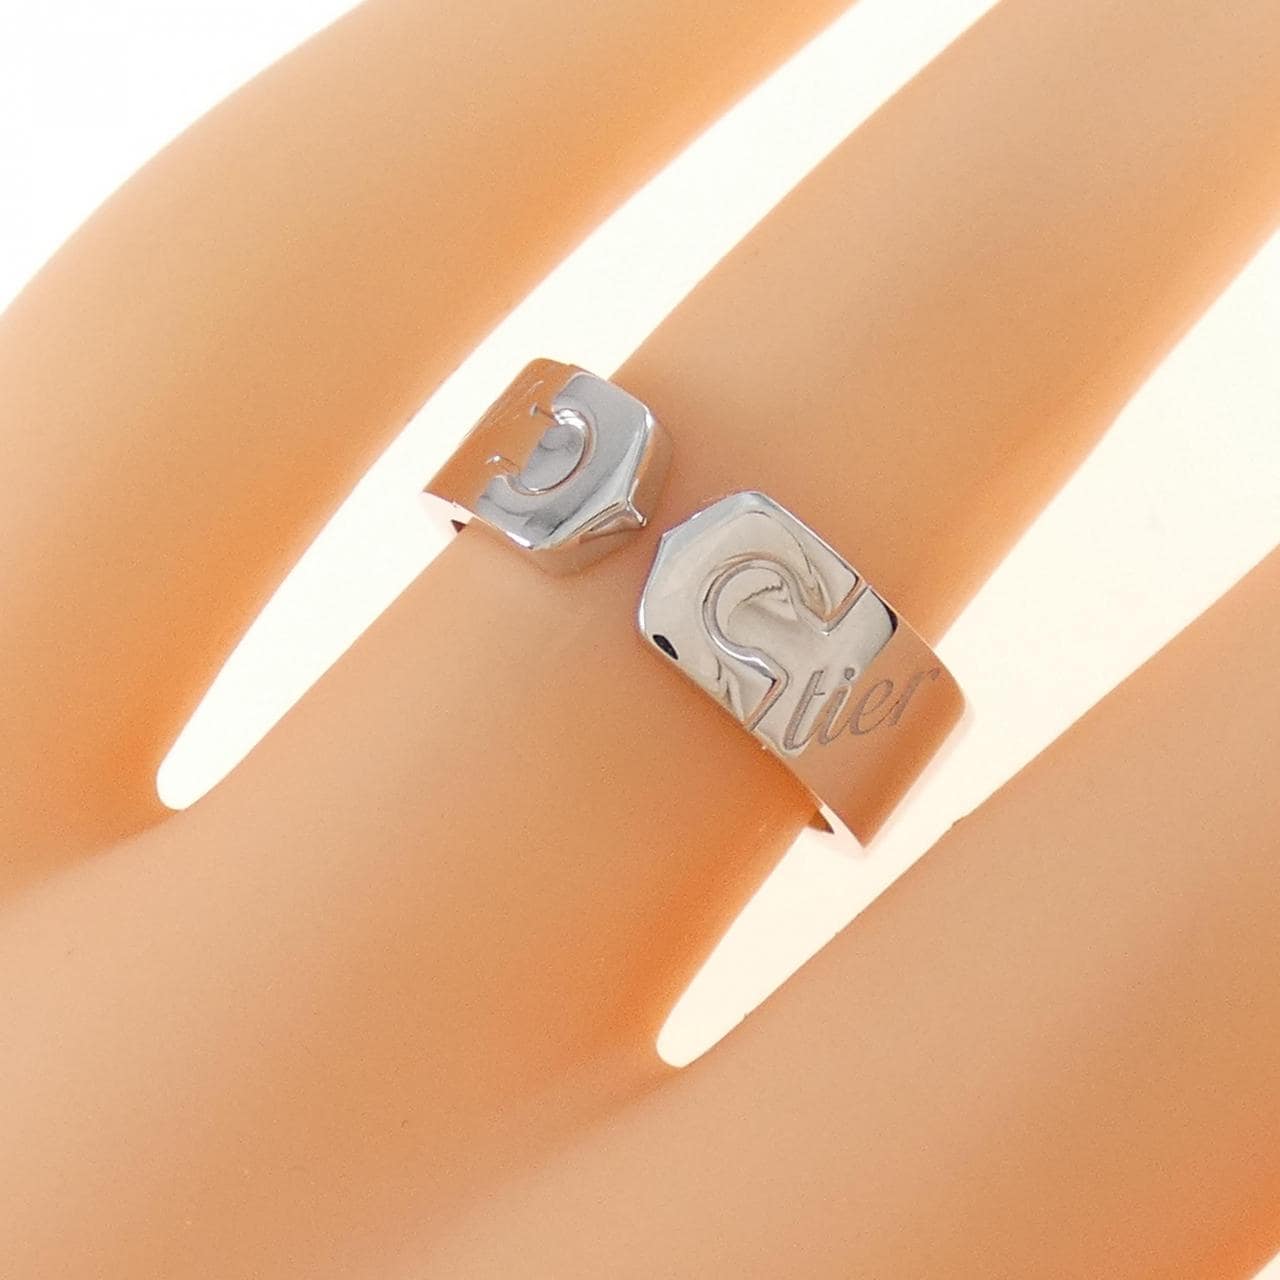 Cartier C2 2007 limited ring